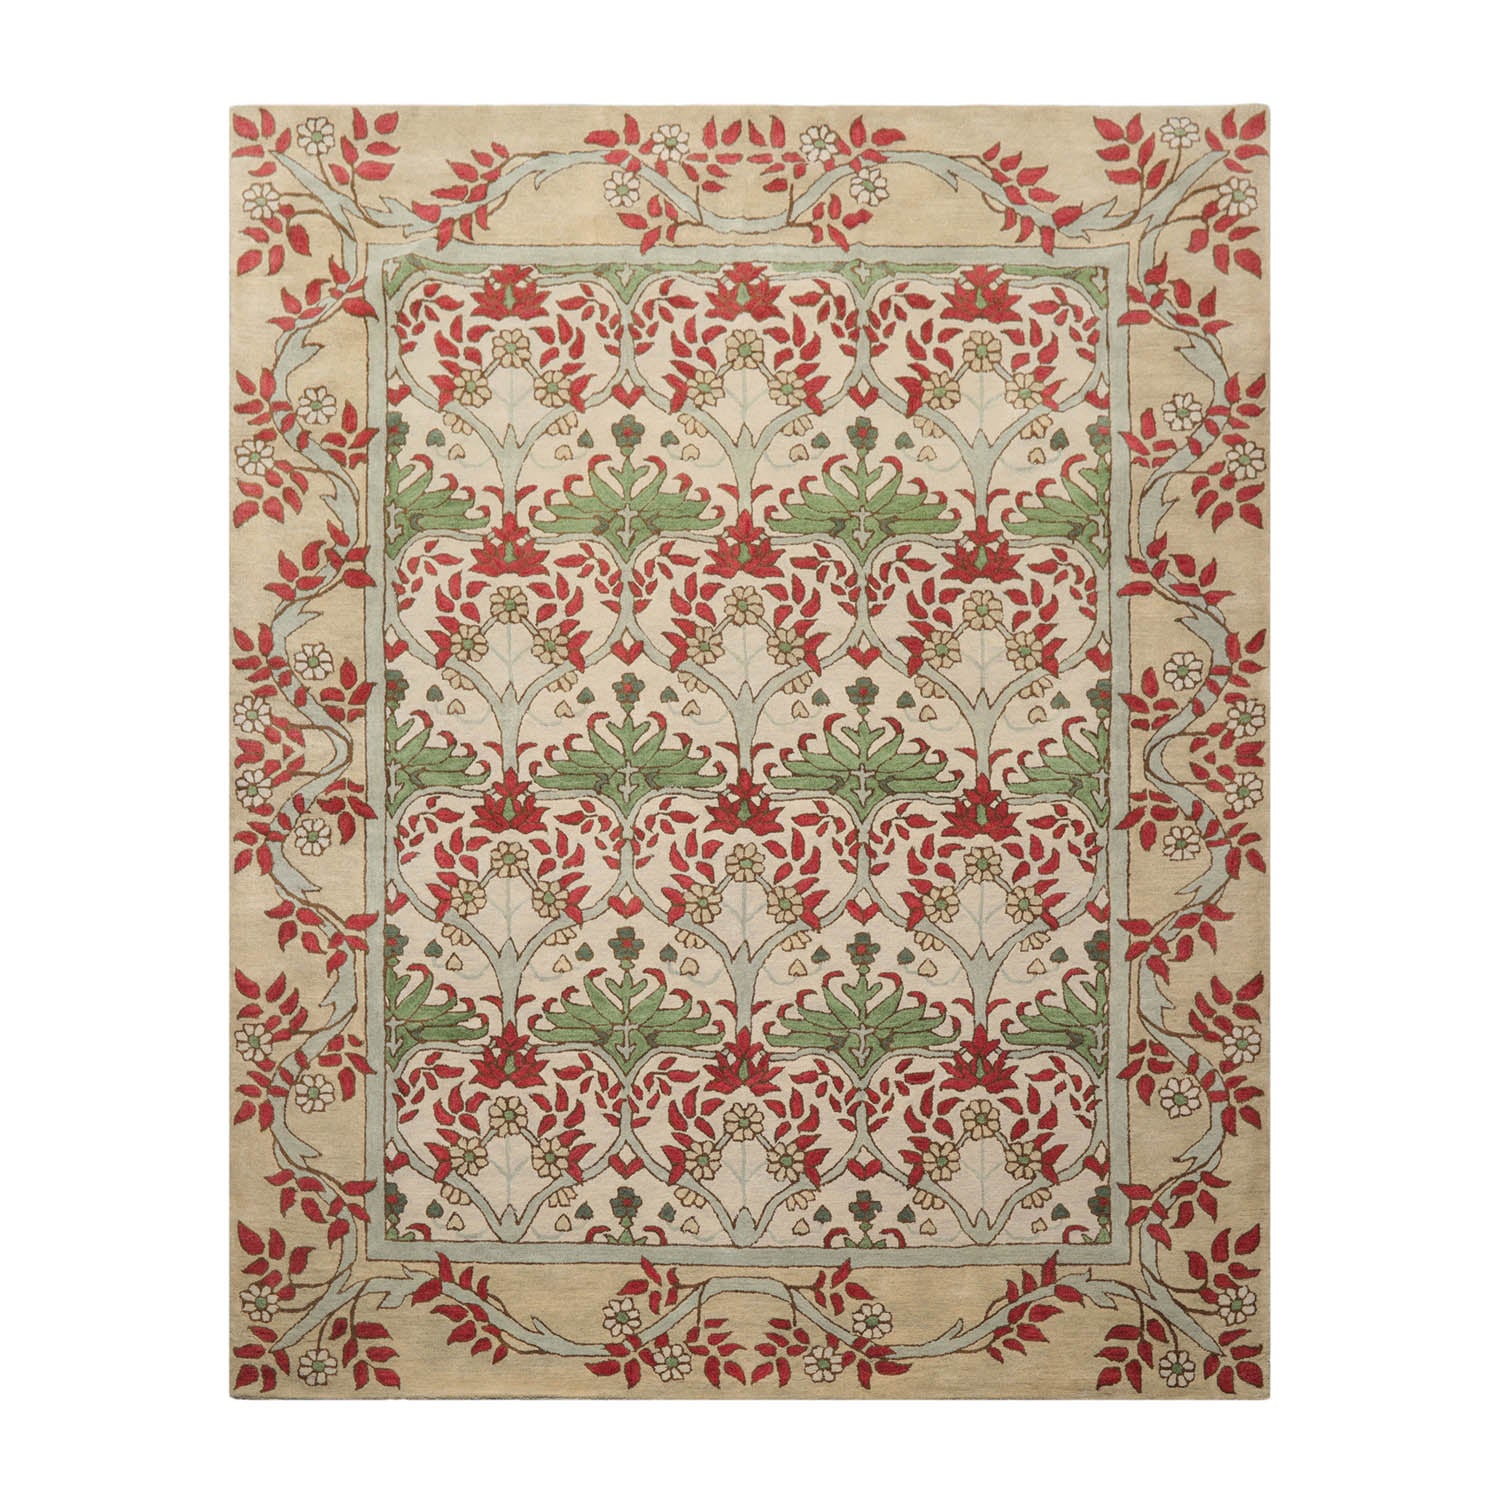 Deroche 8x10 Hand Tufted Hand Made 100% Wool Modern & Contemporary Oriental Area Rug Beige, Moss Color